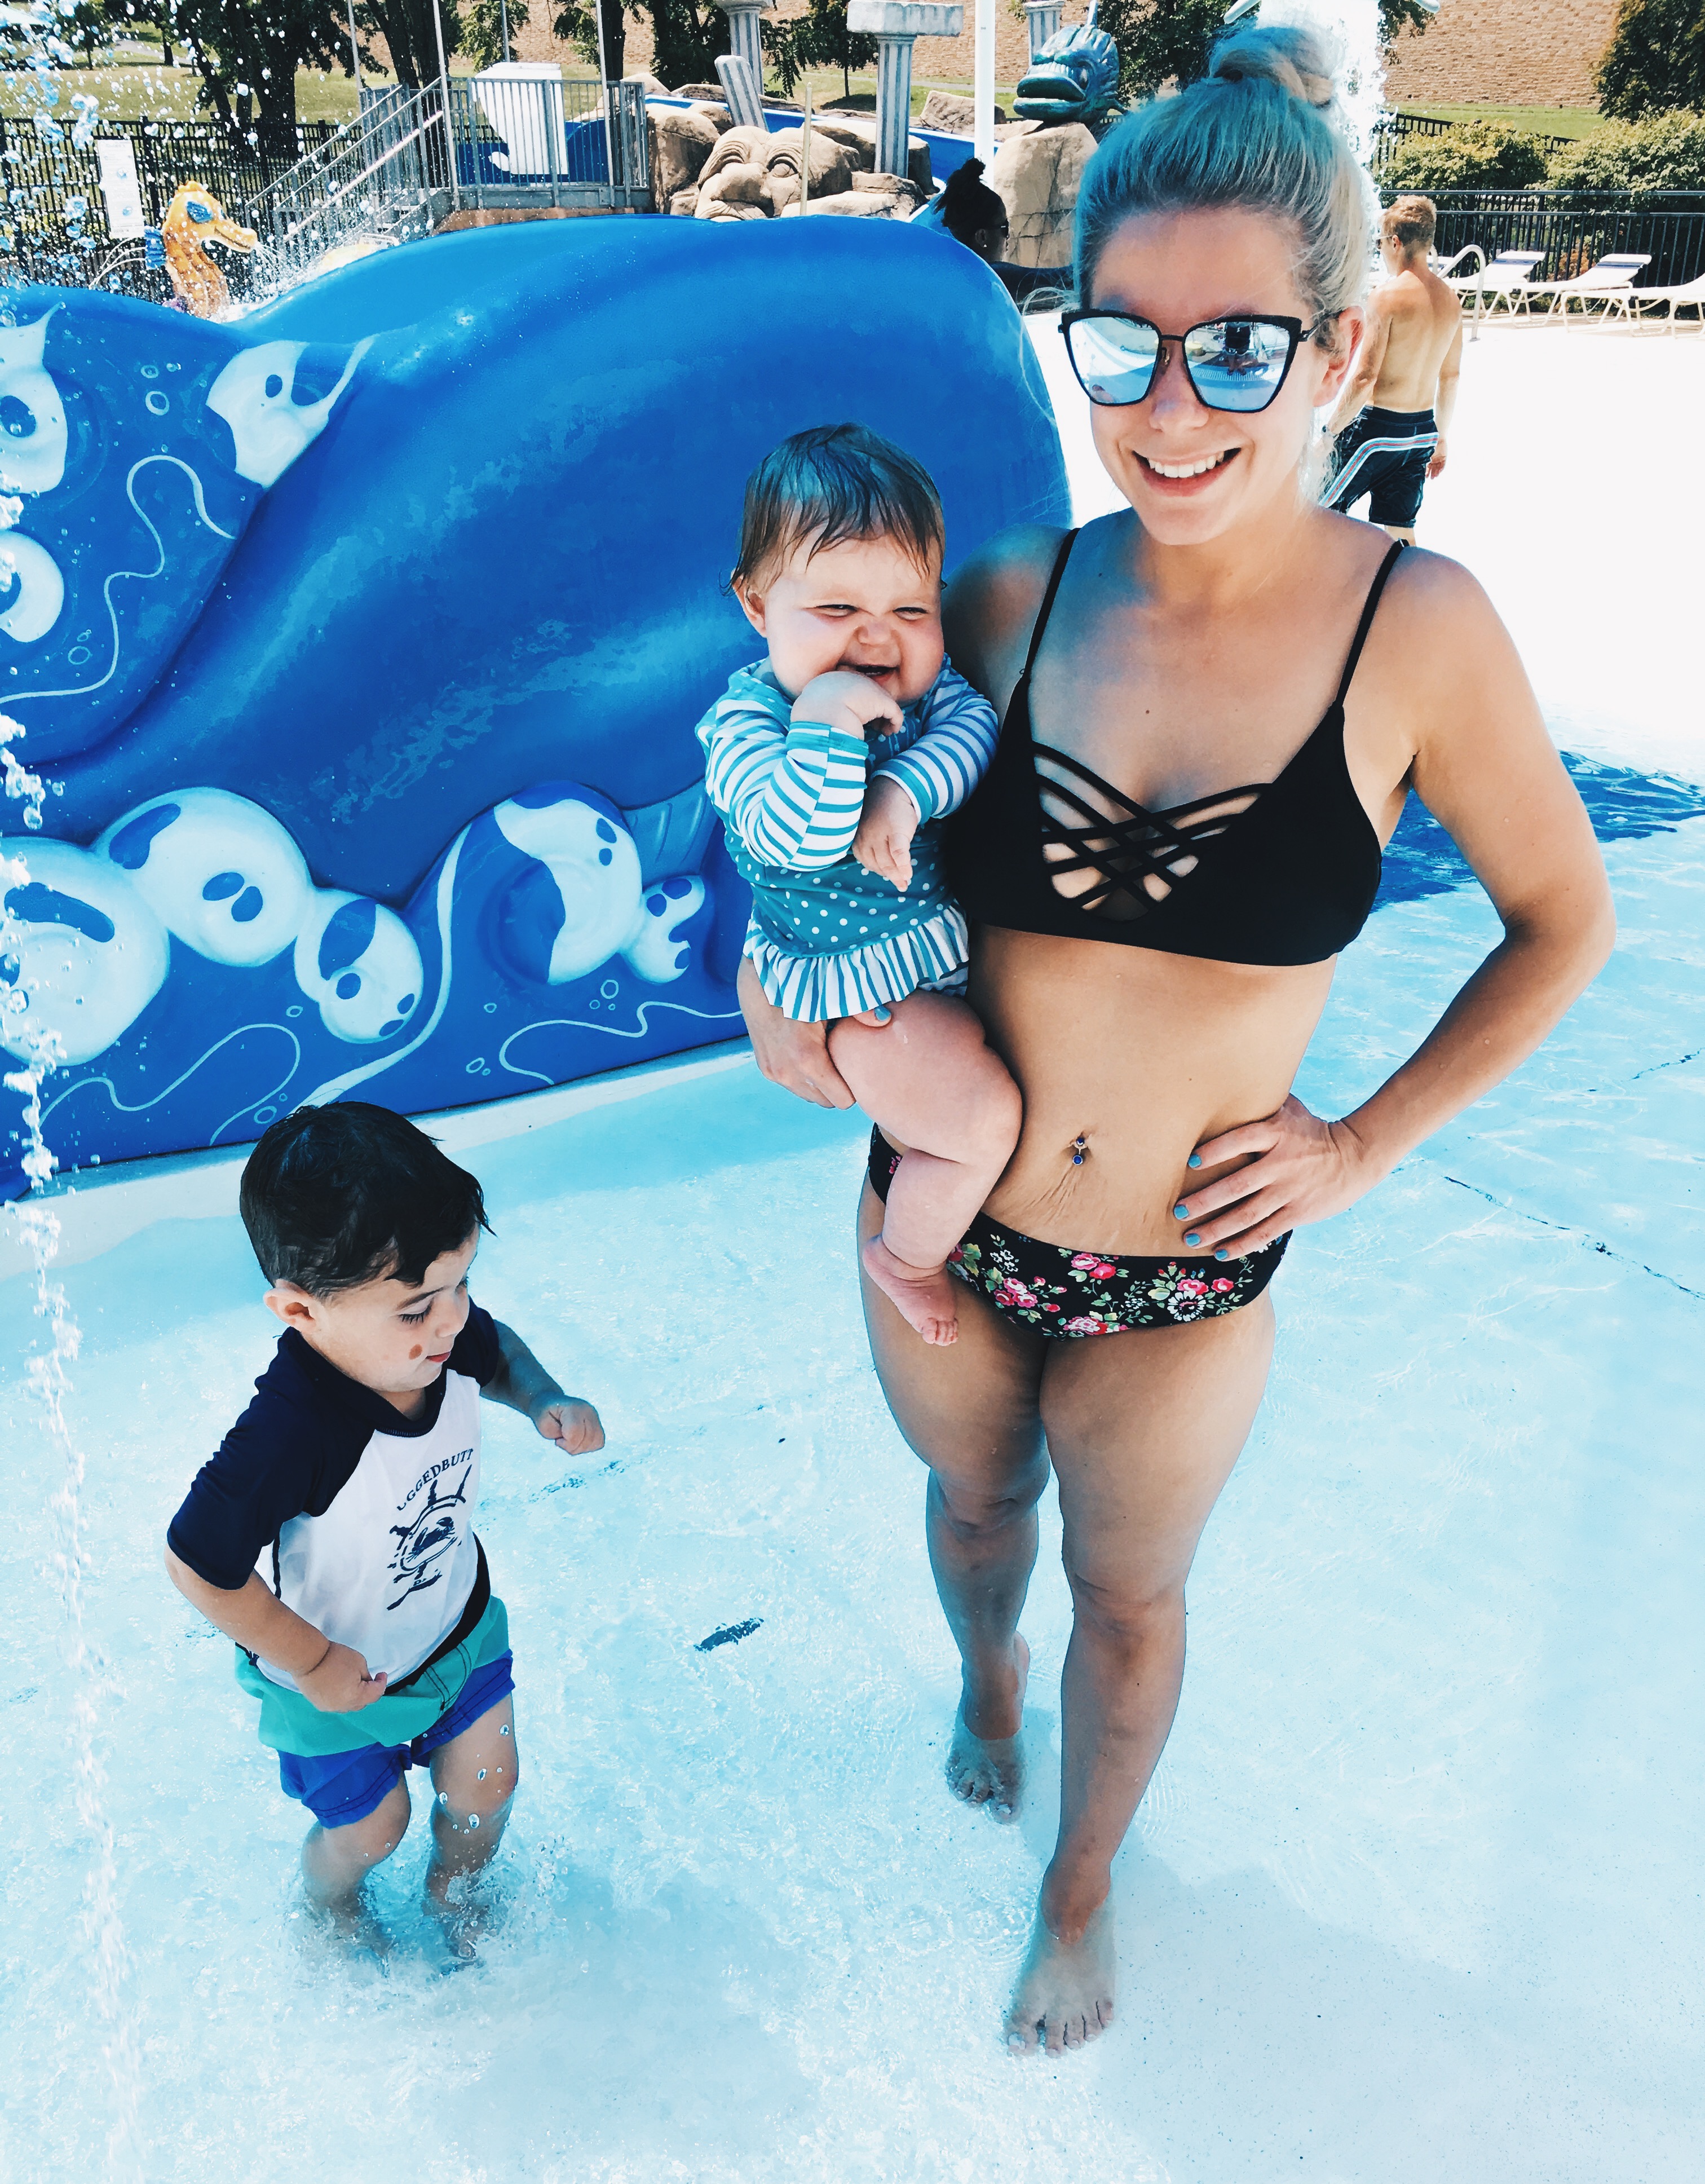 Benefits of Year-Round Swim Lessons -- The benefits of year-round swim lessons are many, and blogger Tricia Nibarger of COVET by tricia shares some of her favorites in this post. The importance of year-round swim lessons for kids is huge to avoid regression and keep a consistent routine. If you're wondering are year-round swim lessons worth it, here's the info you need! #MomBlogger #MommyBlogger #Swimming #SwimLessons #KidActivities